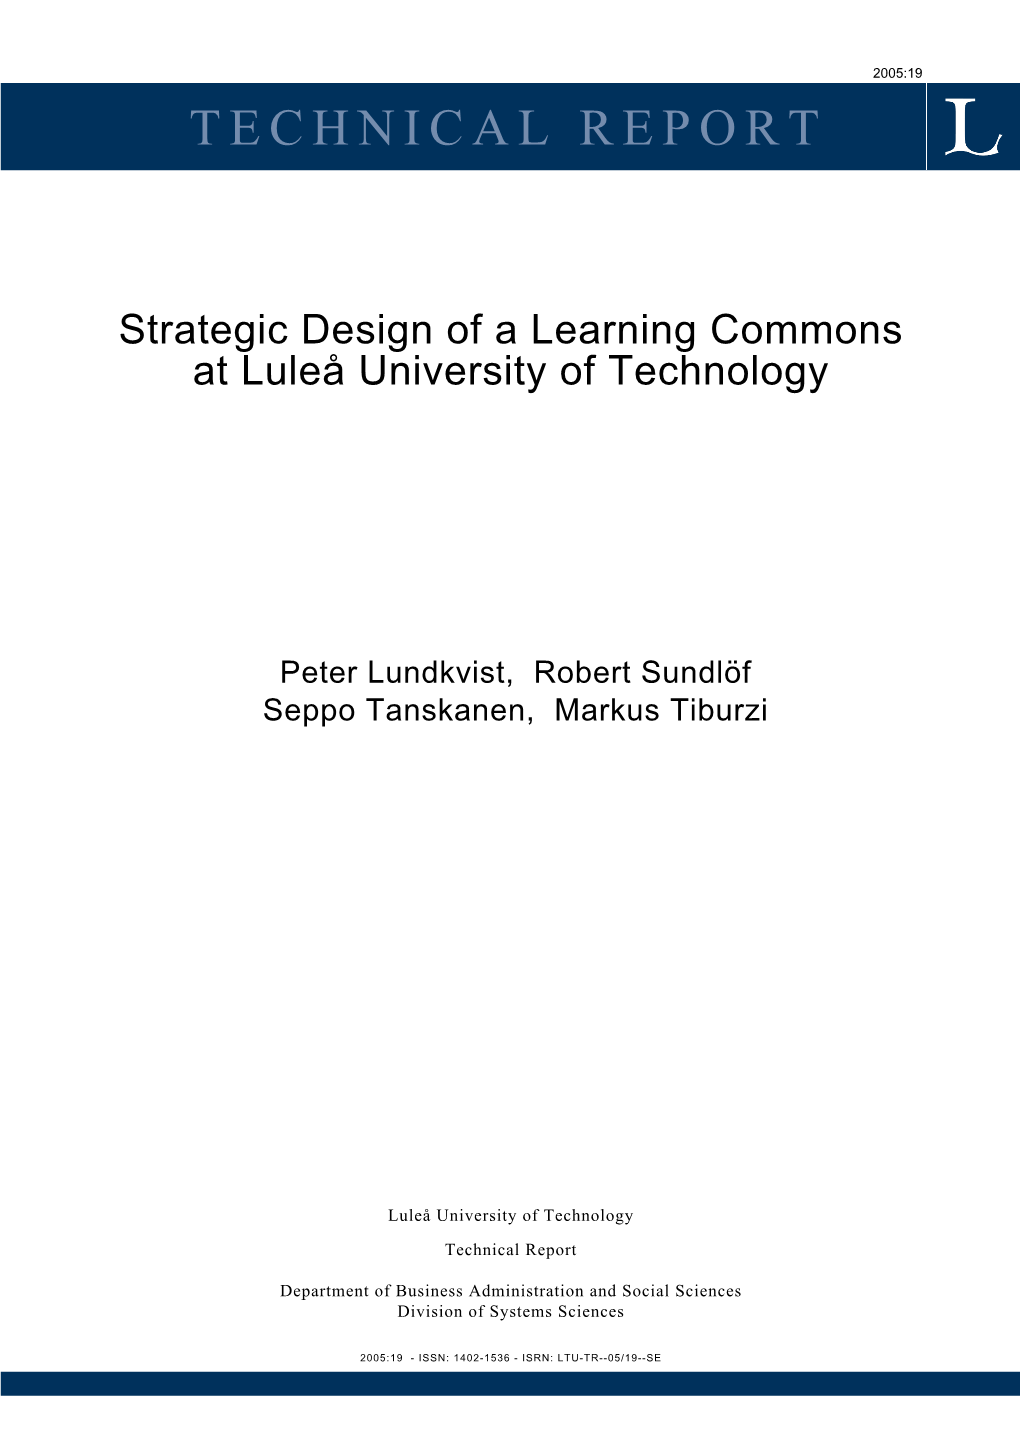 Strategic Design of a Learning Commons at Luleå University of Technology